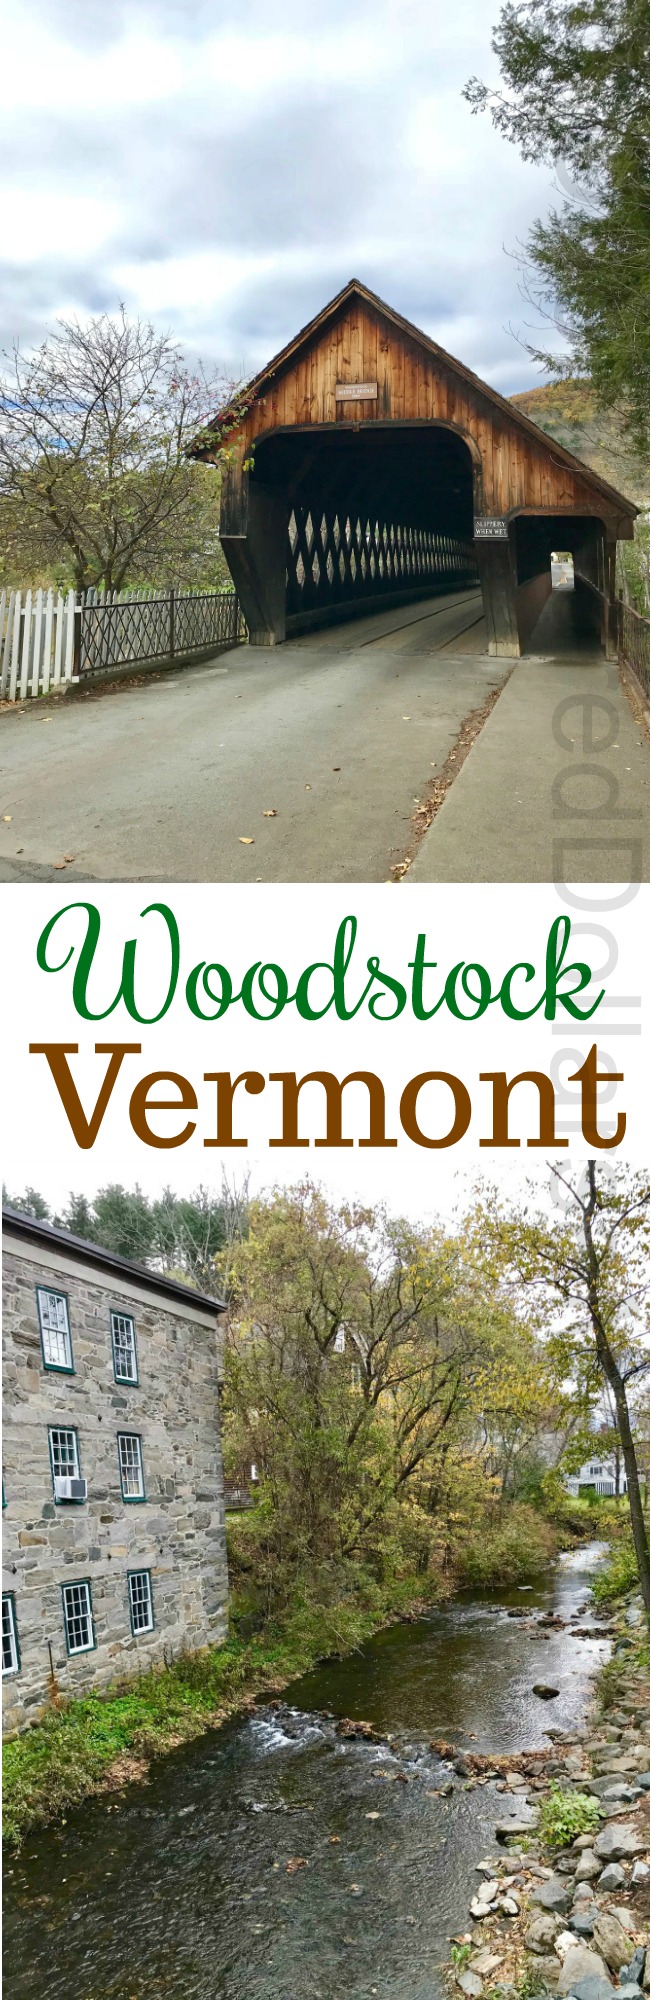 Woodstock, Vermont – The Cutest Downtown Ever, Beautiful Homes, and the $14.50 Sandwich